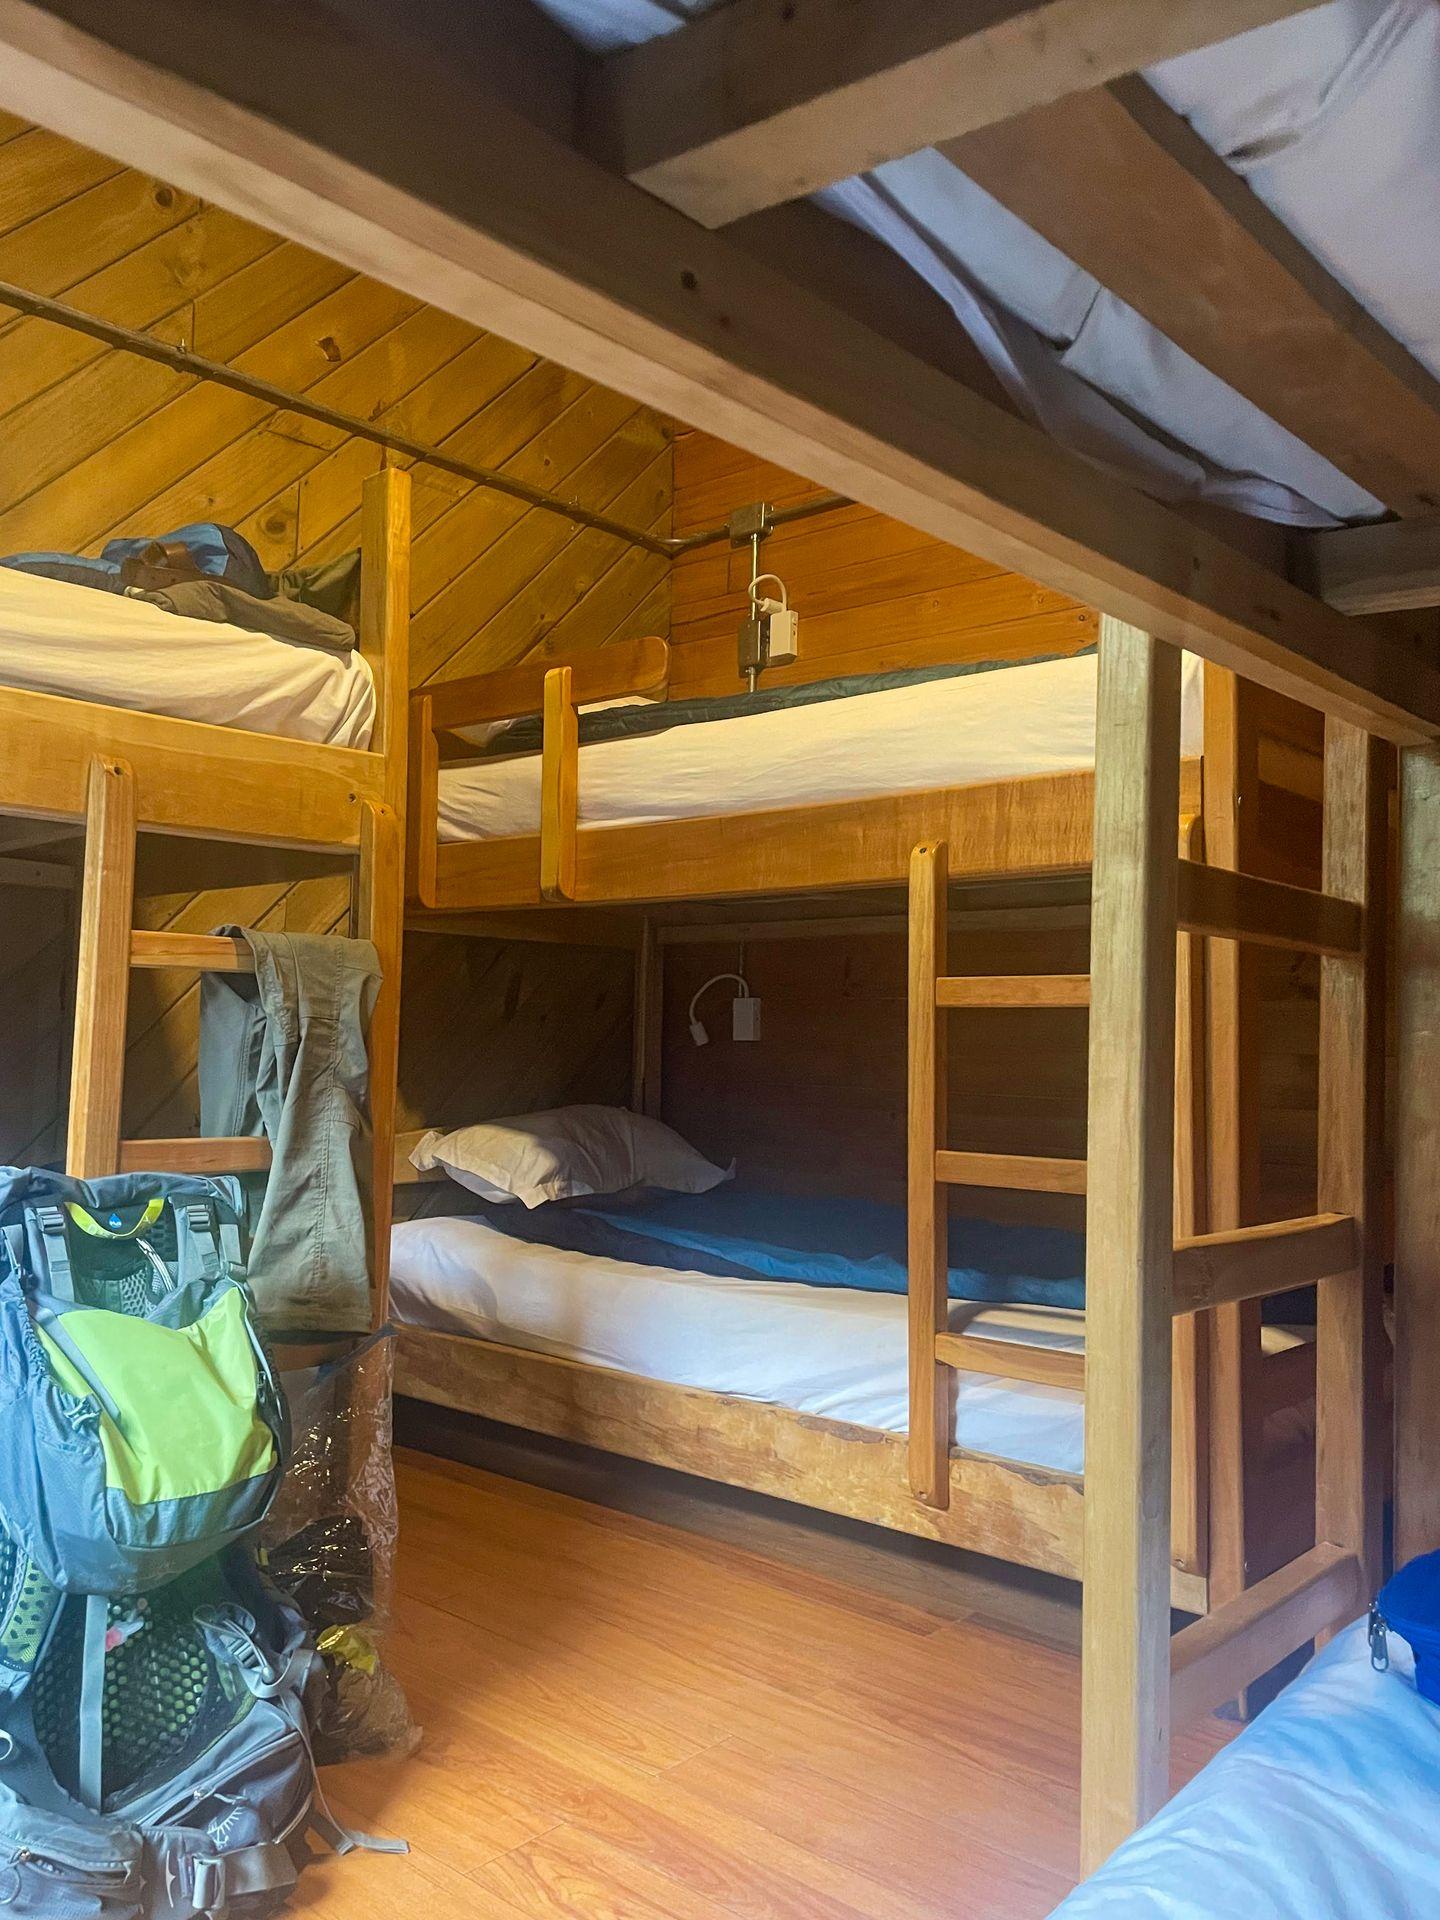 A room with 3 bunkbeds and a large backpack on the floor. Sleeping bags lay across the mattresses.